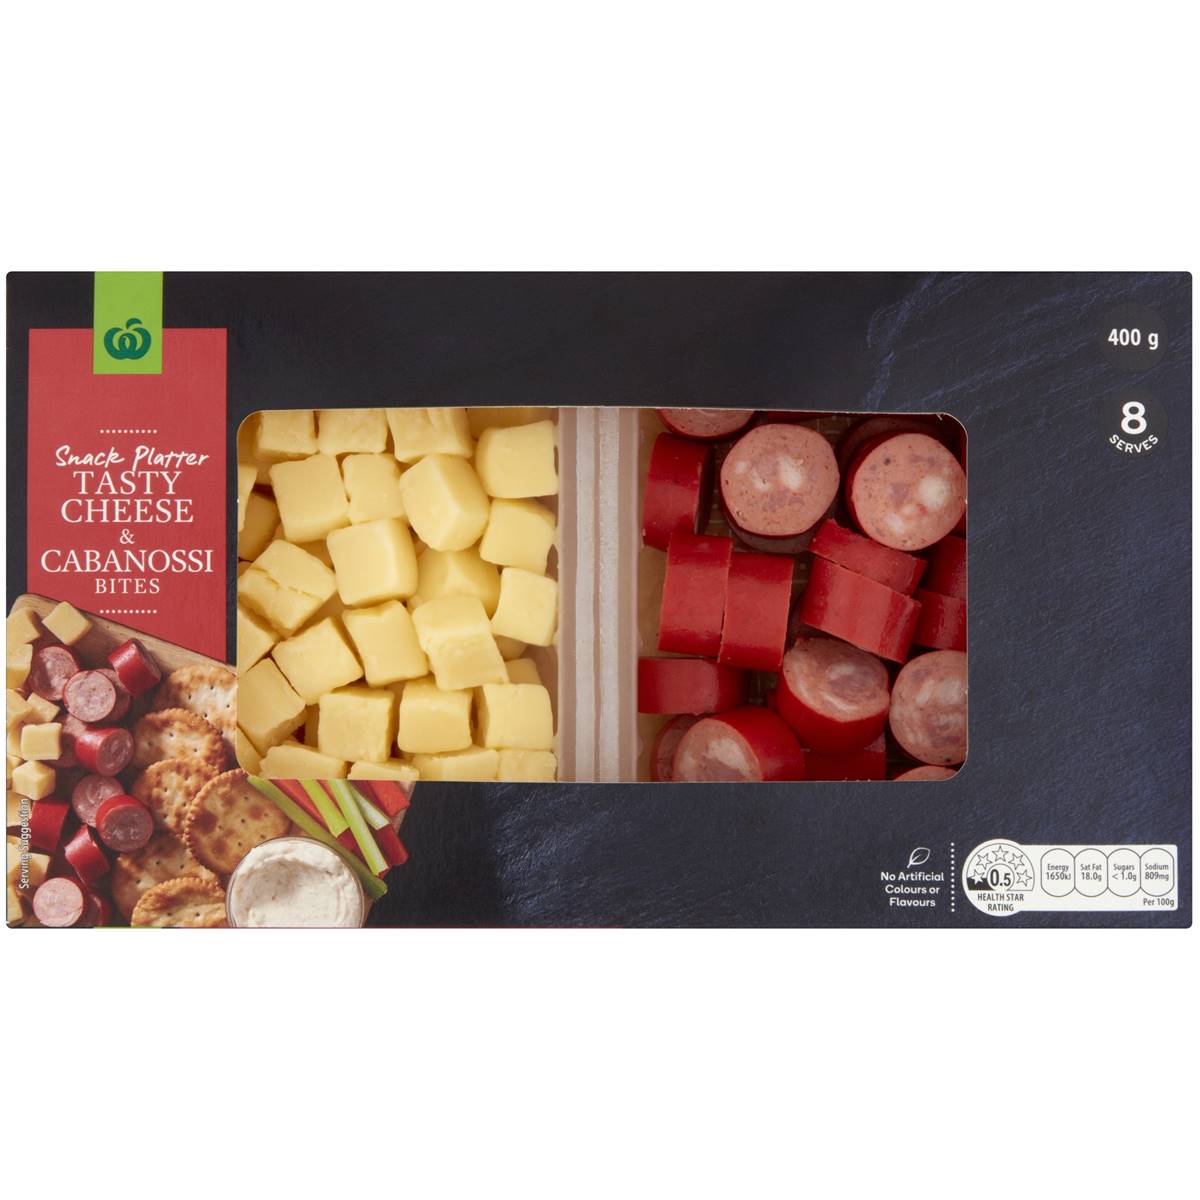 Calories in Woolworths Cabanossi & Tasty Cheese Bites Cheese & Cabanossi Bites